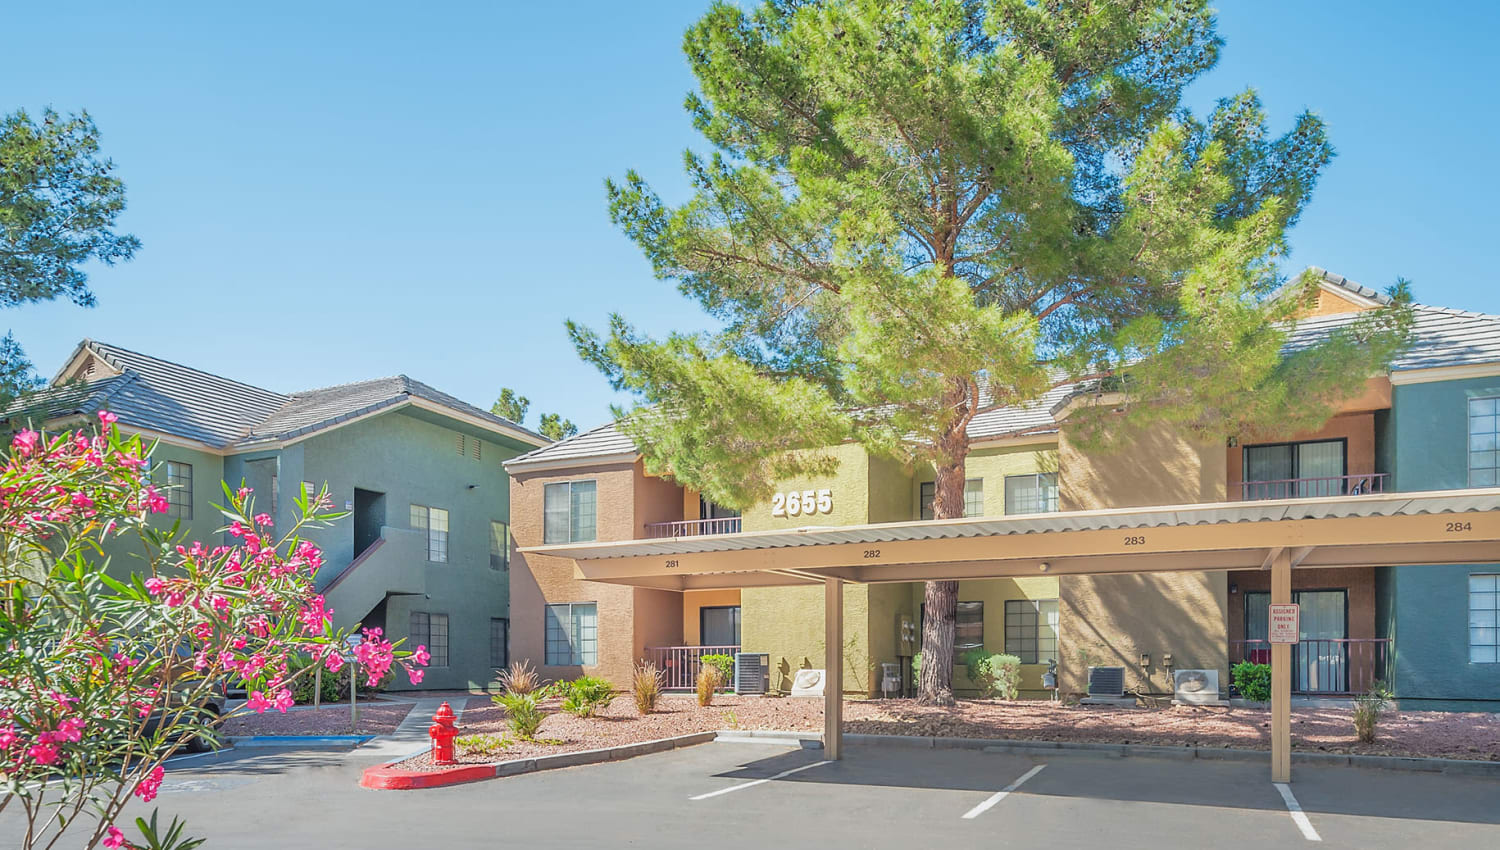 Plenty of covered parking available at Shelter Cove Apartments in Las Vegas, Nevada